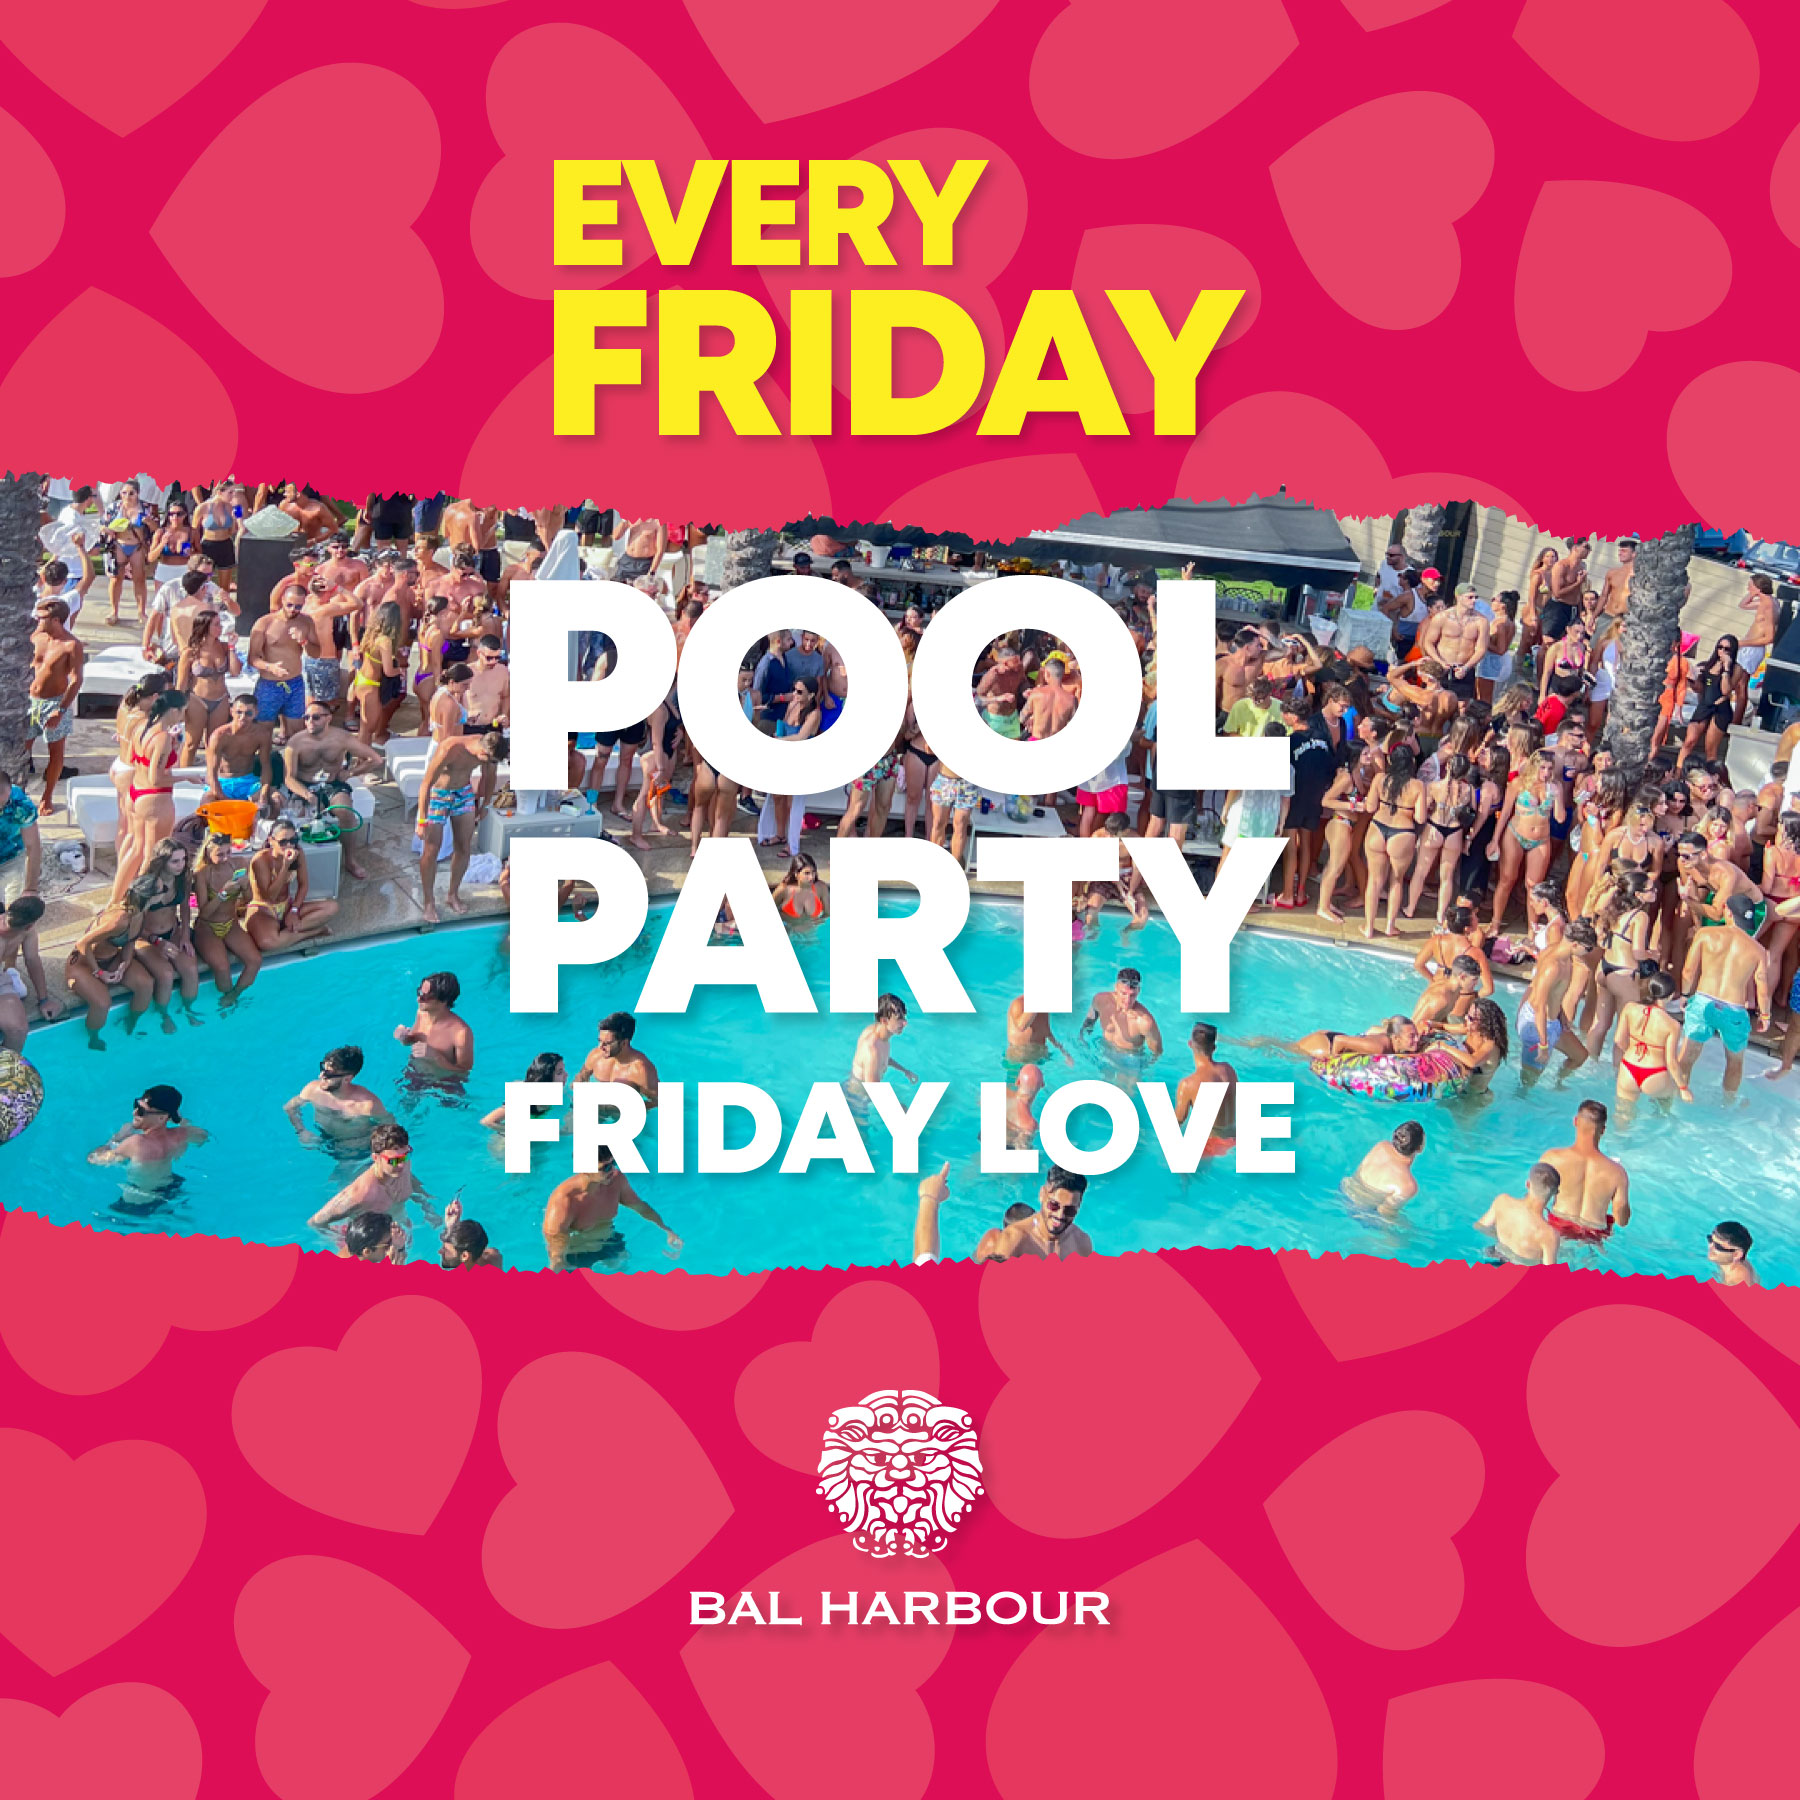 friday love pool party